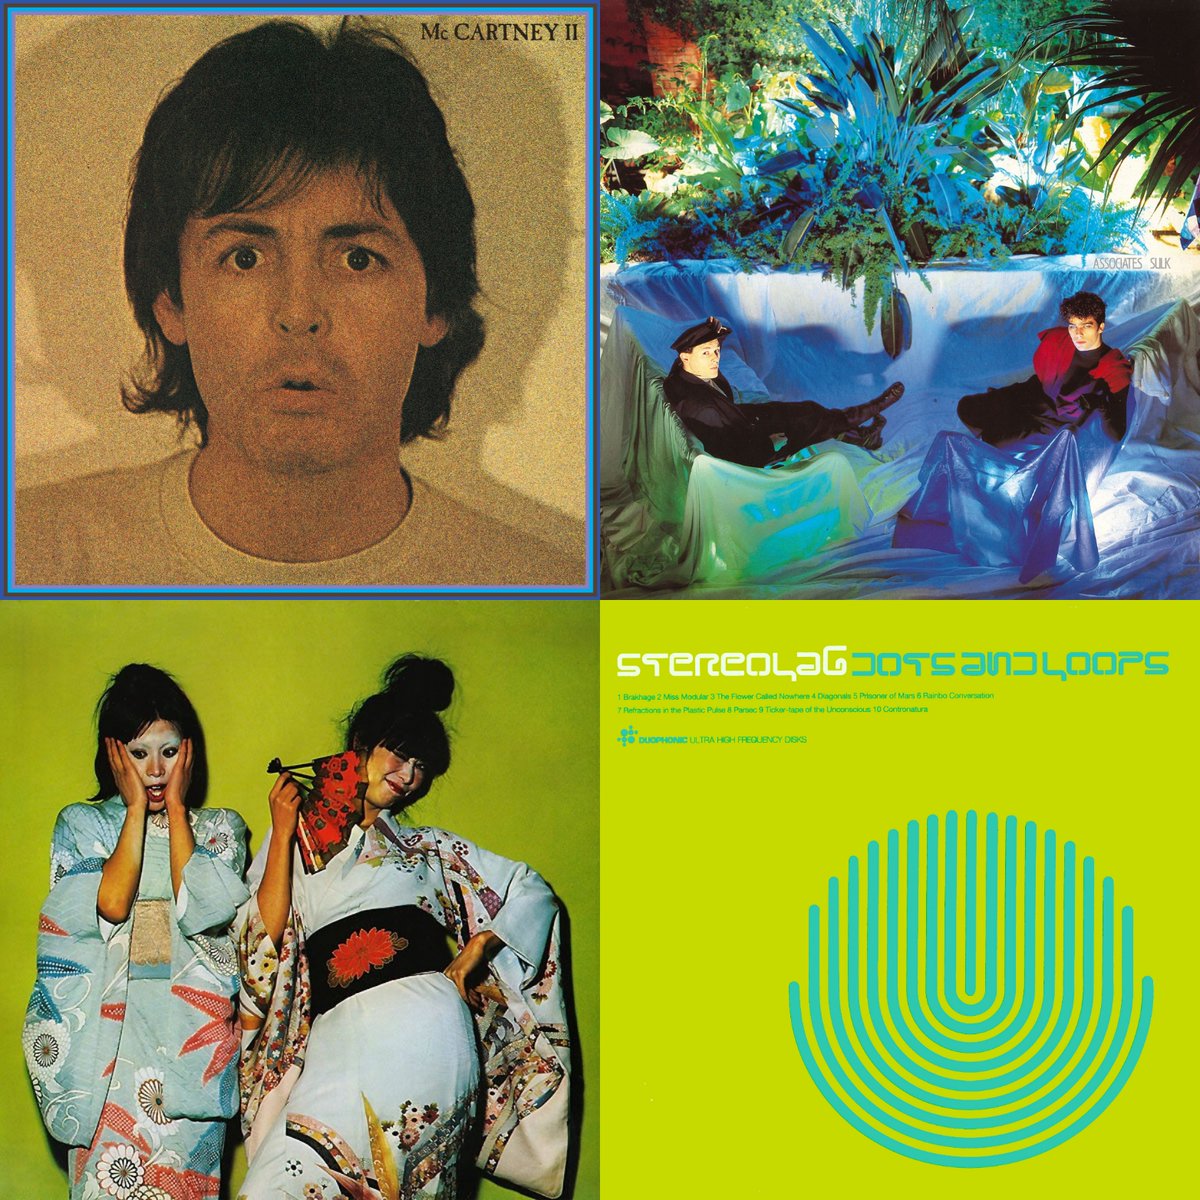 What are your favorite art pop albums?

rateyourmusic.com/discussion/mus…

Associates - 'Sulk' (@beggarsgroup)
@PaulMcCartney - ‘McCartney II’
@sparksofficial - ‘Kimono My House’
@stereolabgroop - ‘Dots and Loops’